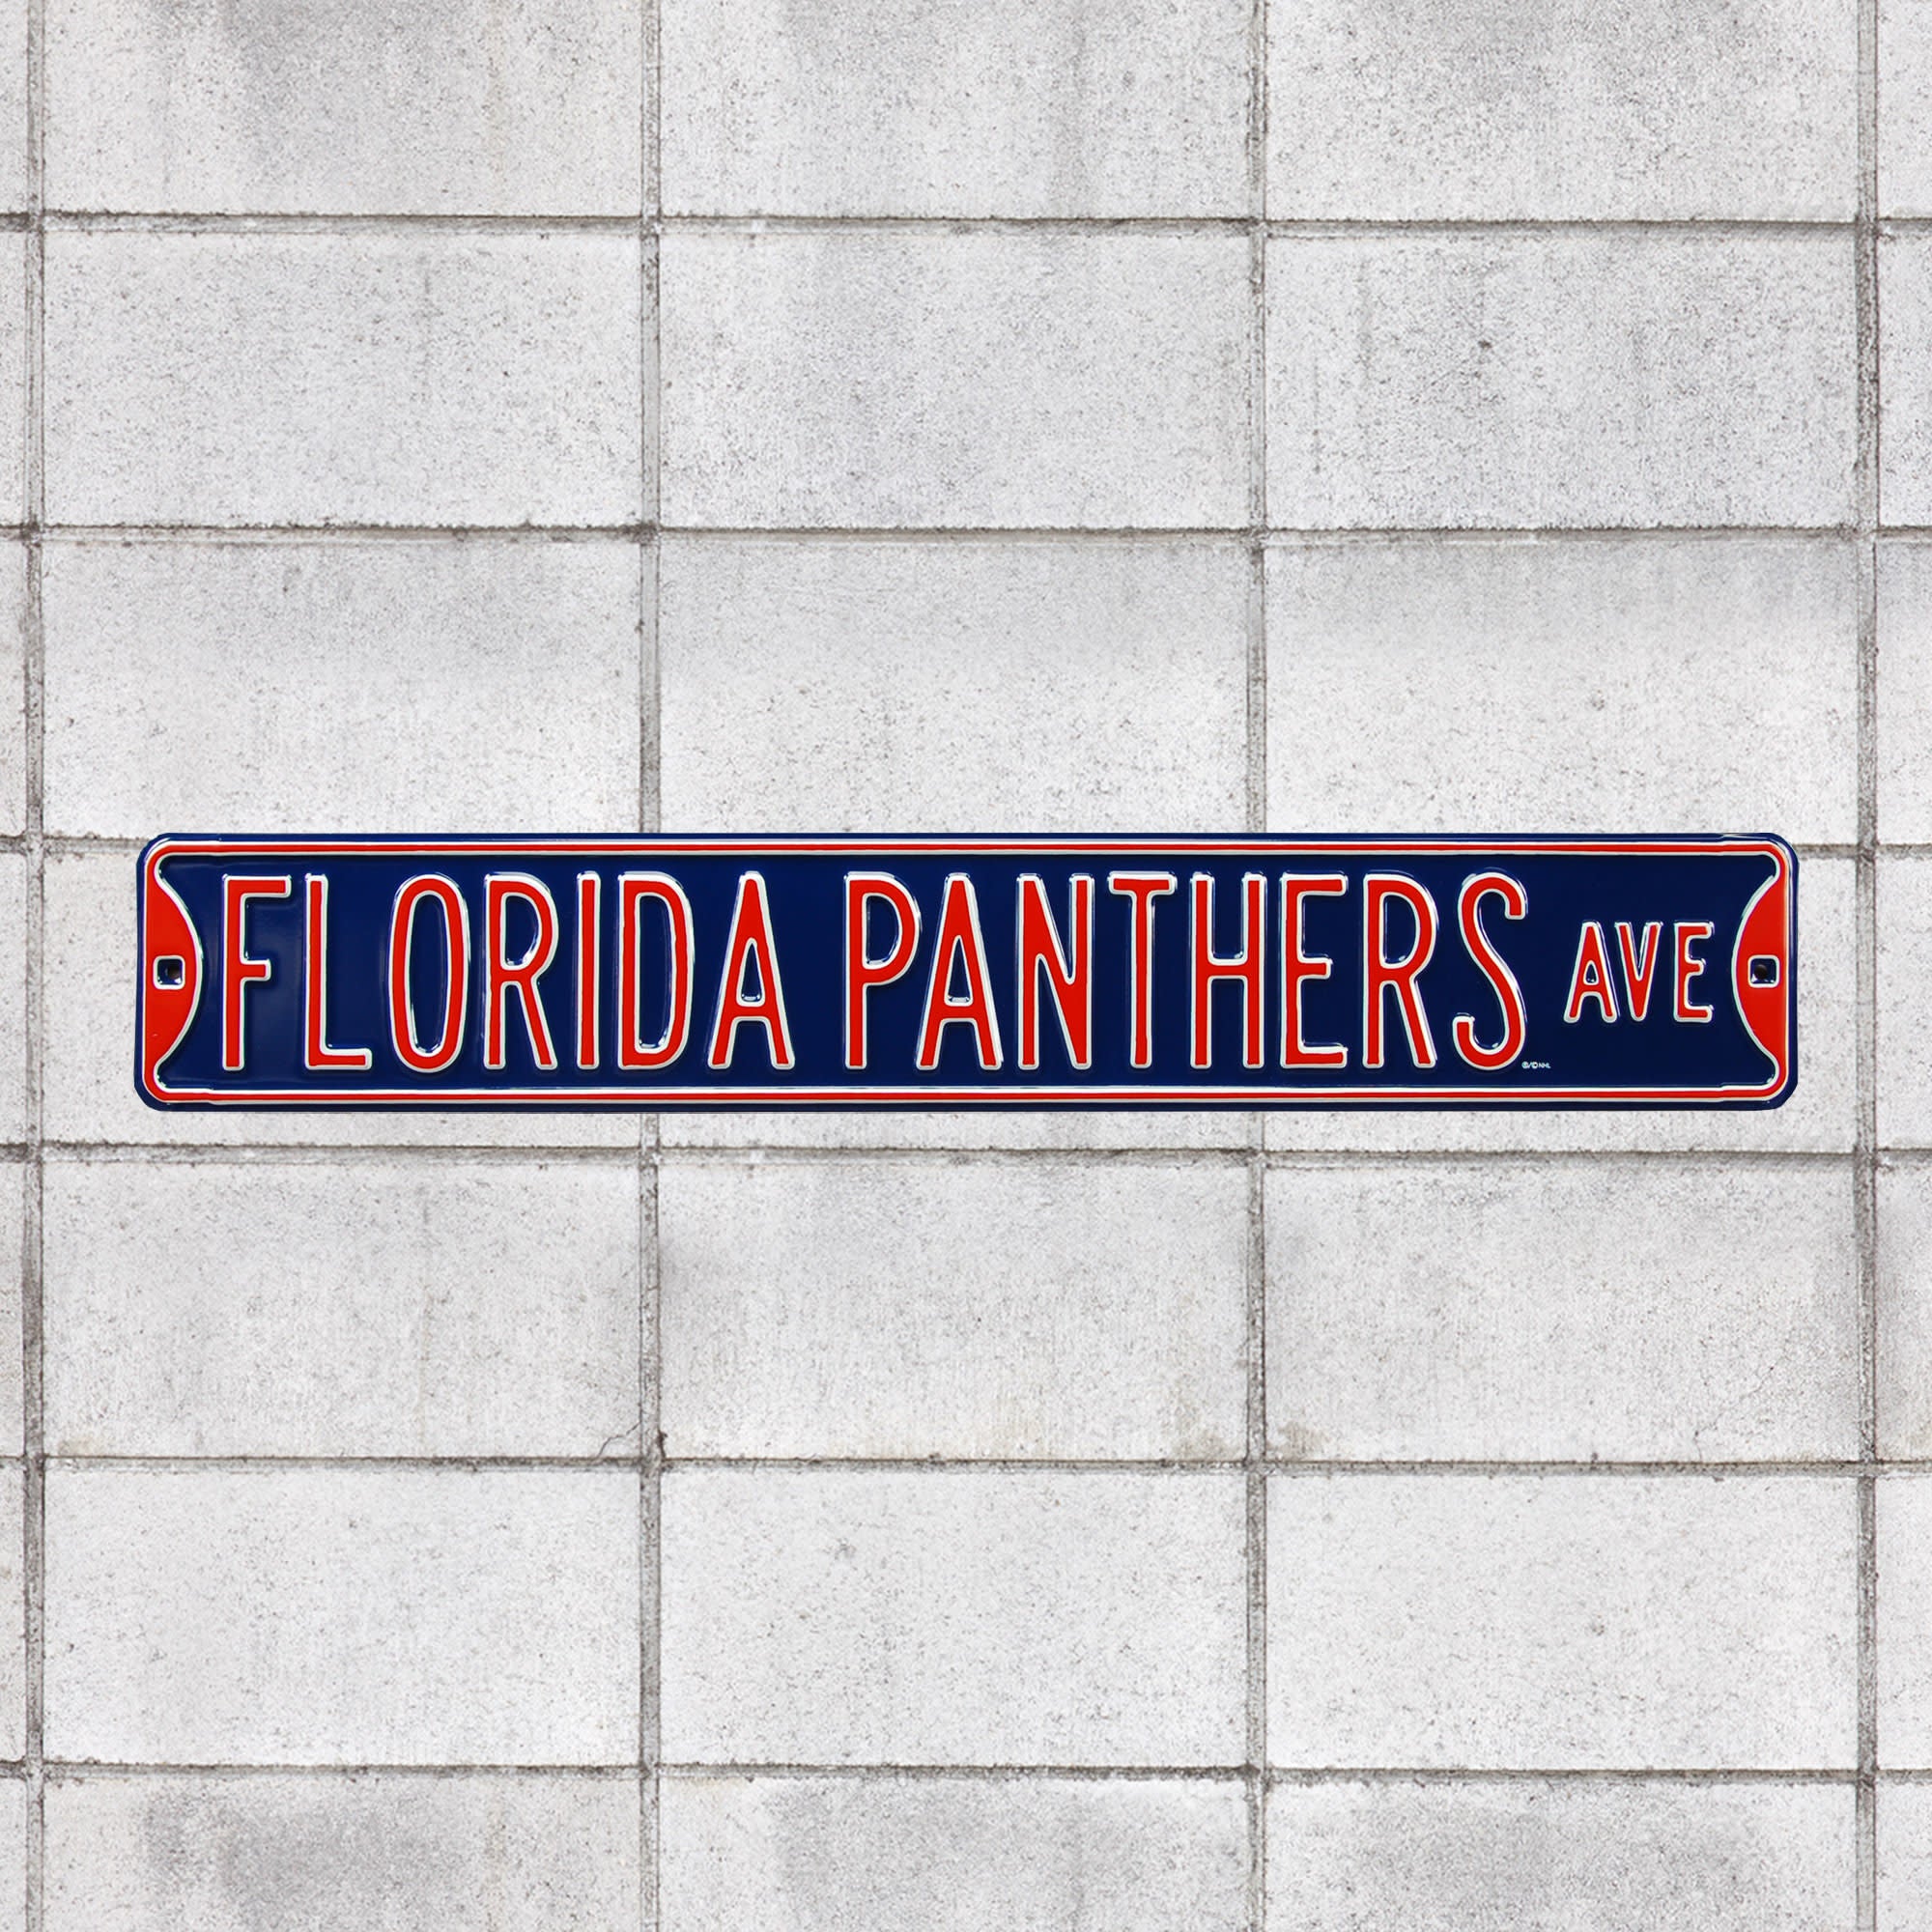 Florida Panthers: Florida Panthers Avenue - Officially Licensed NHL Metal Street Sign 36.0"W x 6.0"H by Fathead | 100% Steel